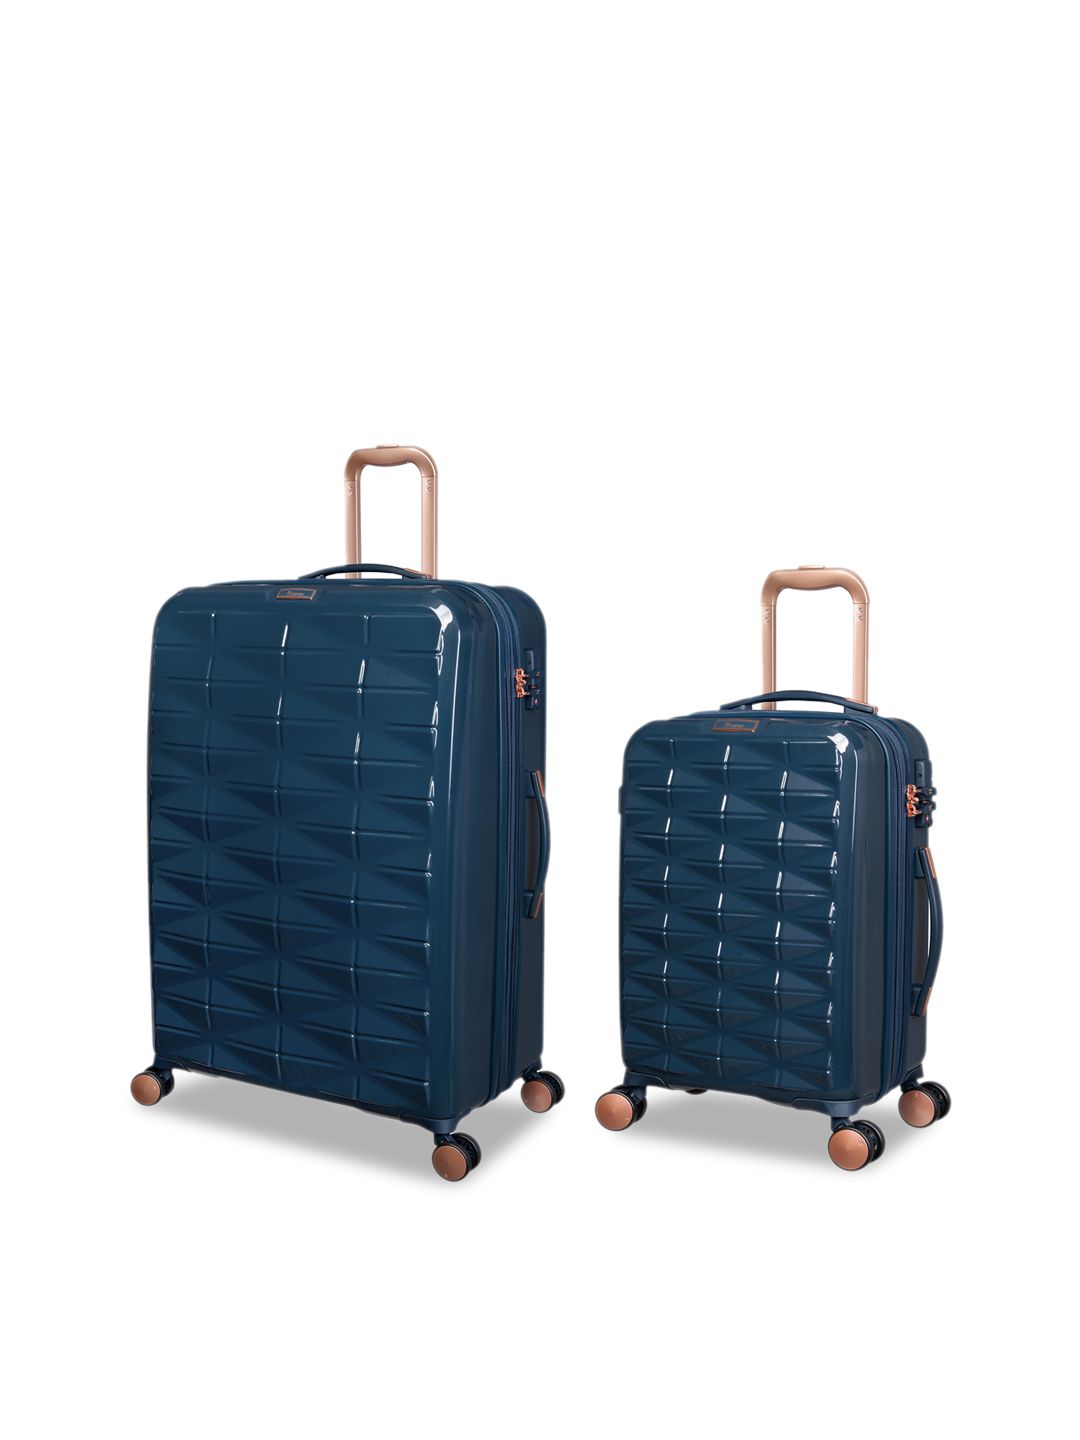 IT luggage Set Of 2 Navy Blue Solid Hard-Sided Trolley Bags Price in India